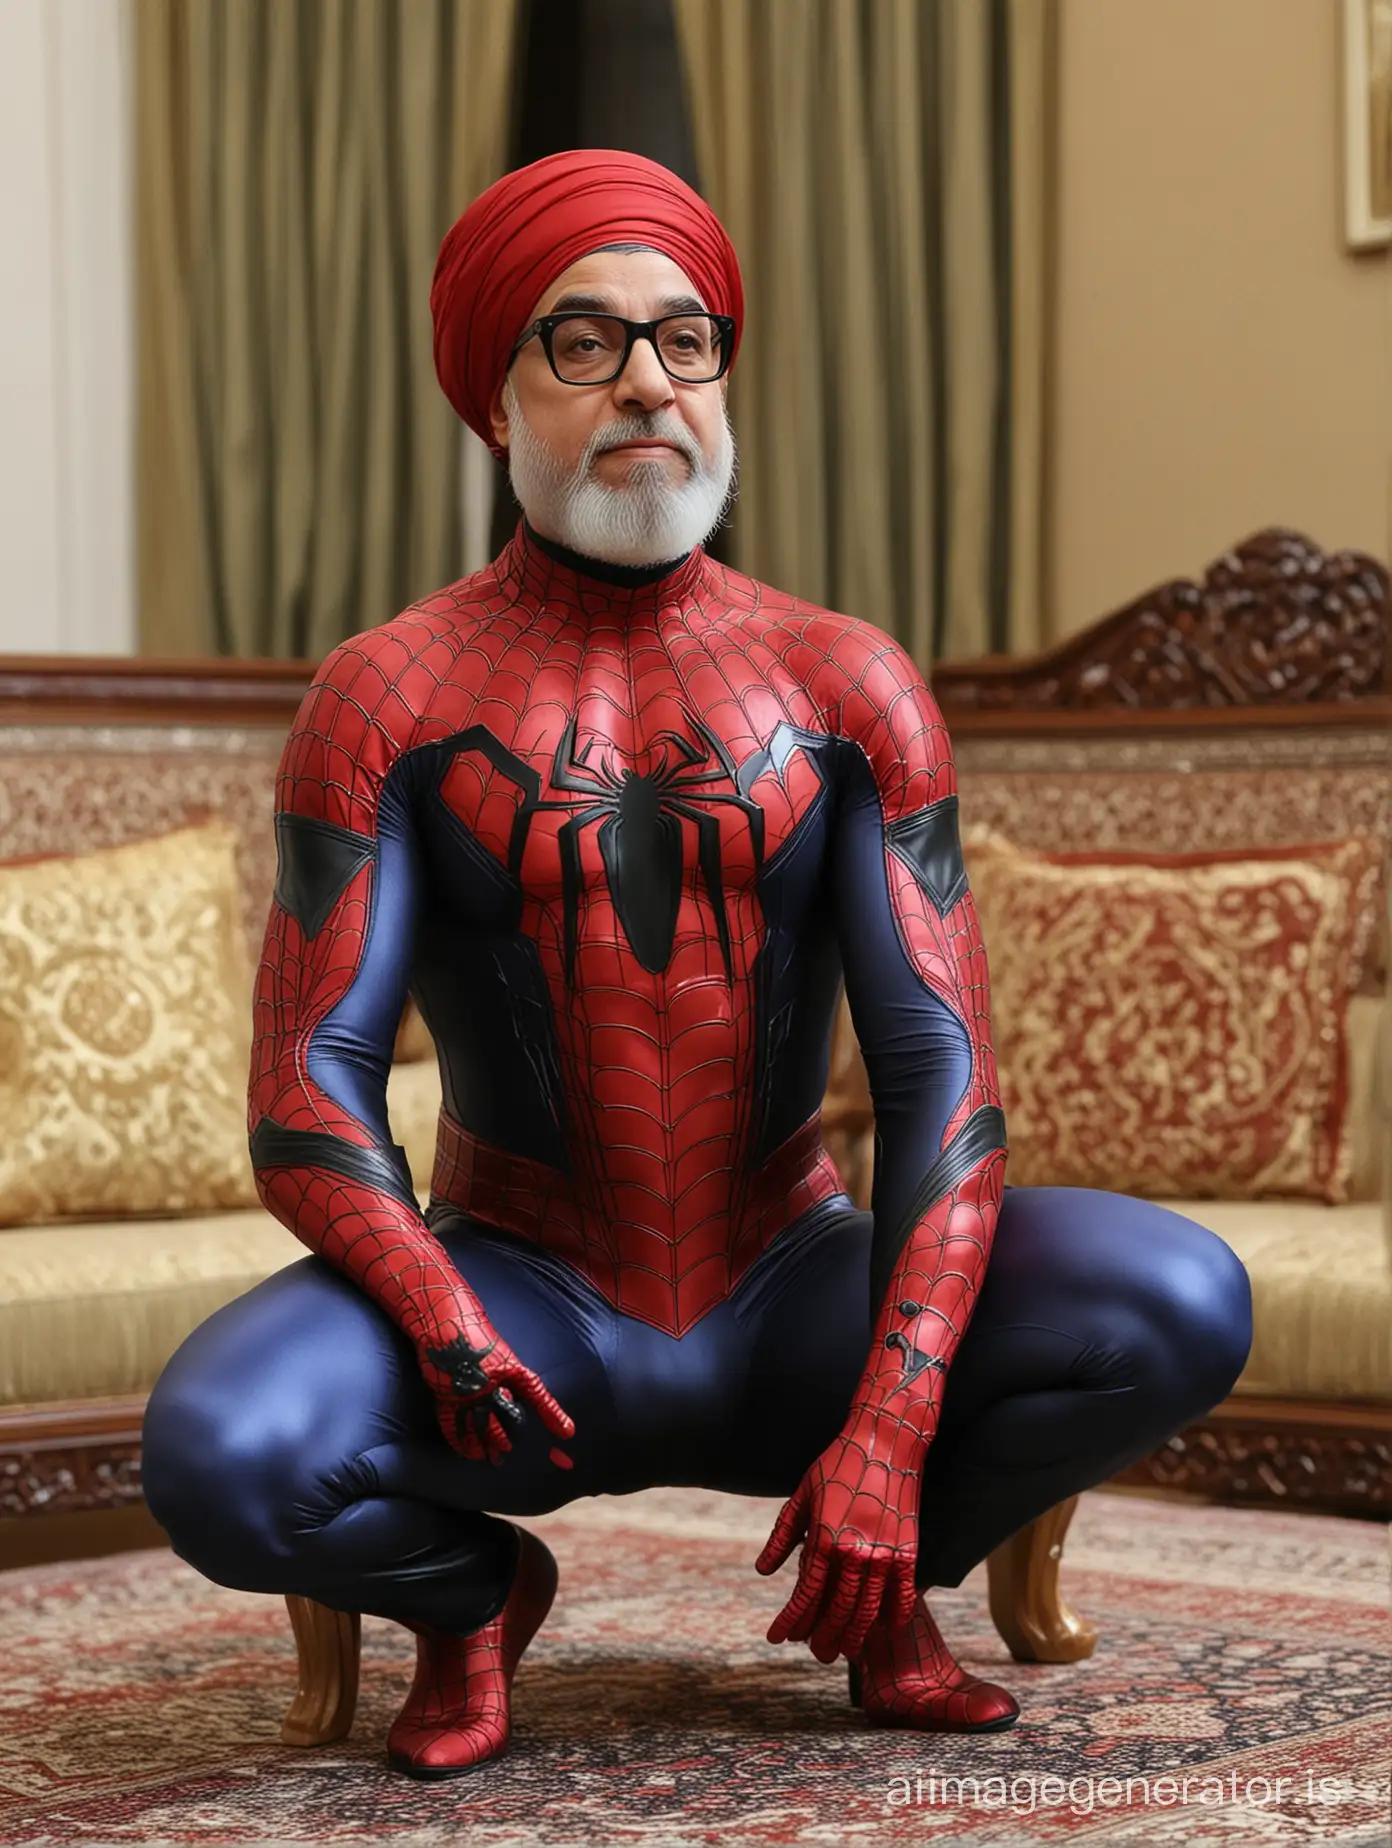 Hassan-Rouhani-in-Spiderman-Costume-Playful-Political-Leader-Embraces-Heroic-Persona